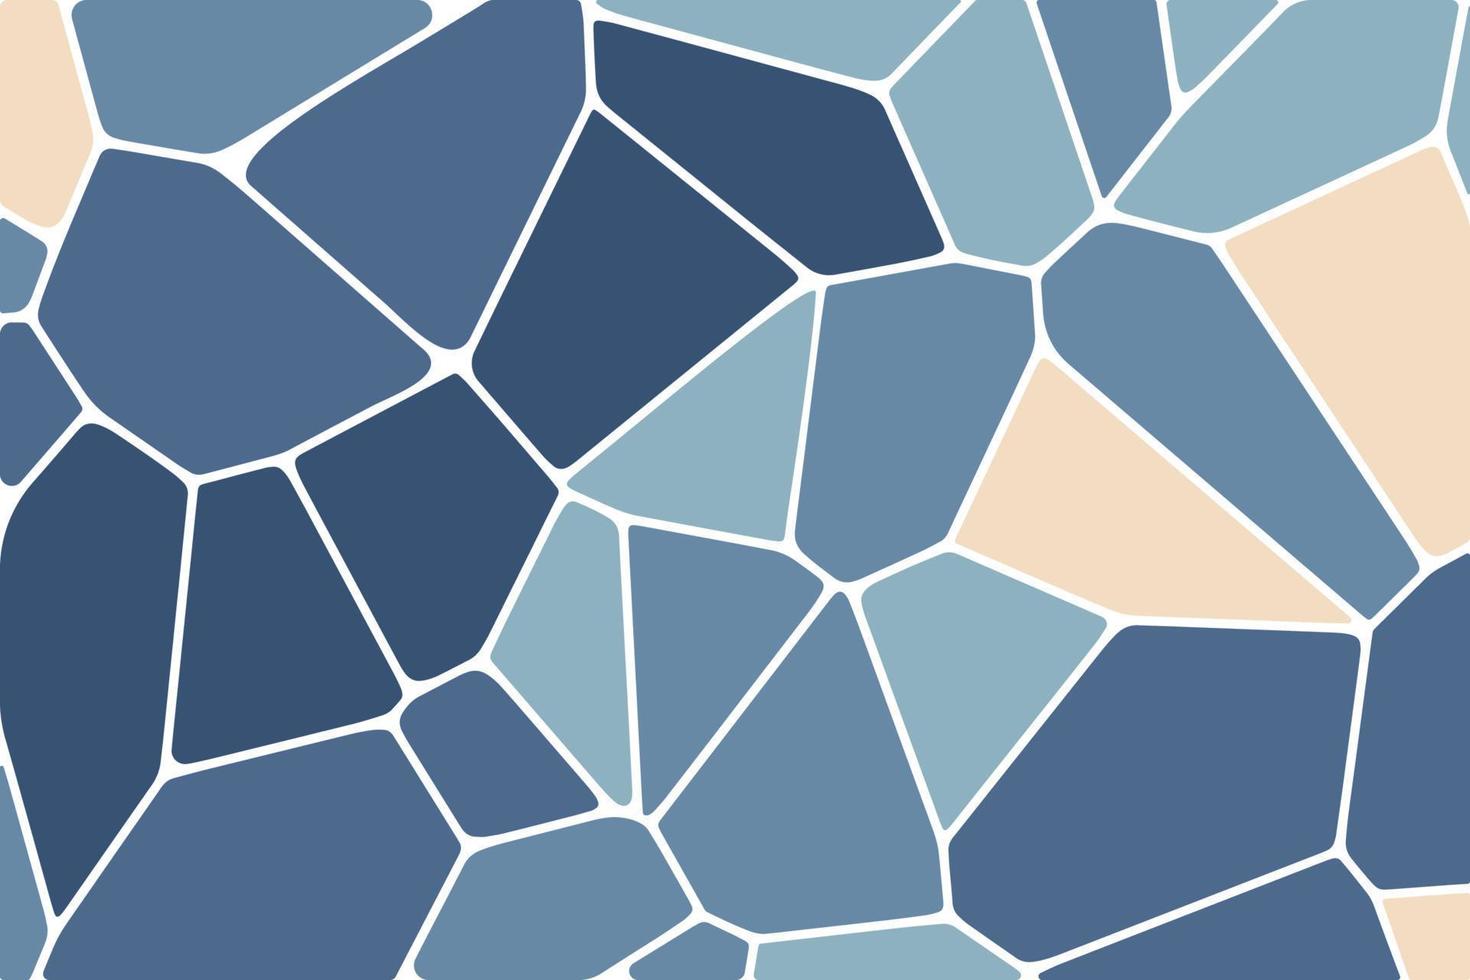 Clean and modern broken shapes geometric illustration. Abstract blue Voronoi diagram background design vector